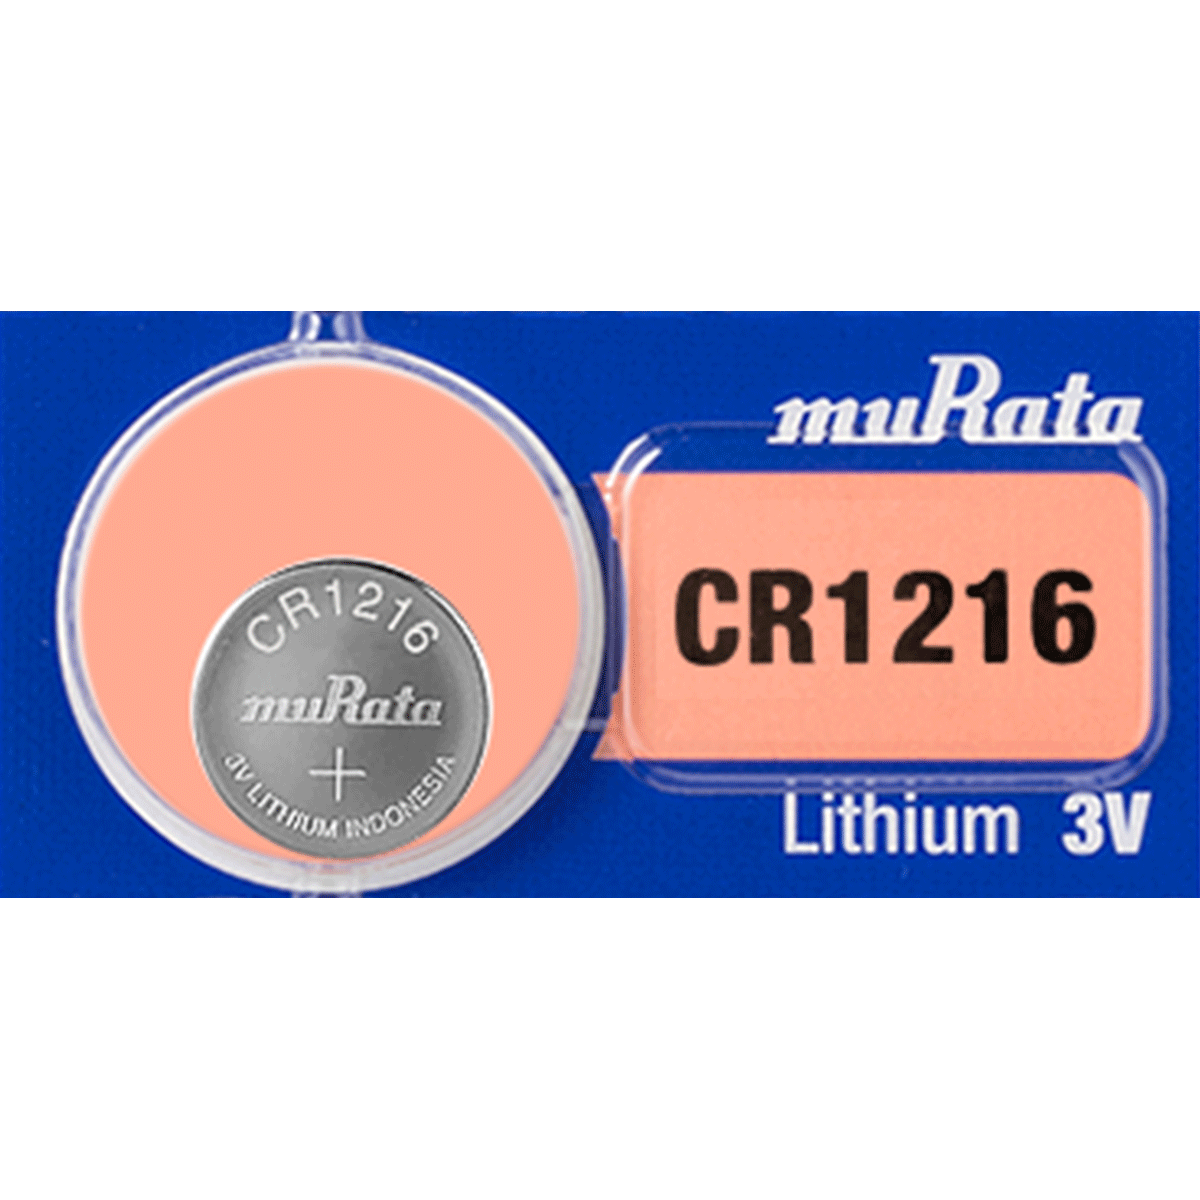 Murata CR1216 Battery 3V Lithium Coin Cell (1 pc.) (Formerly SONY)